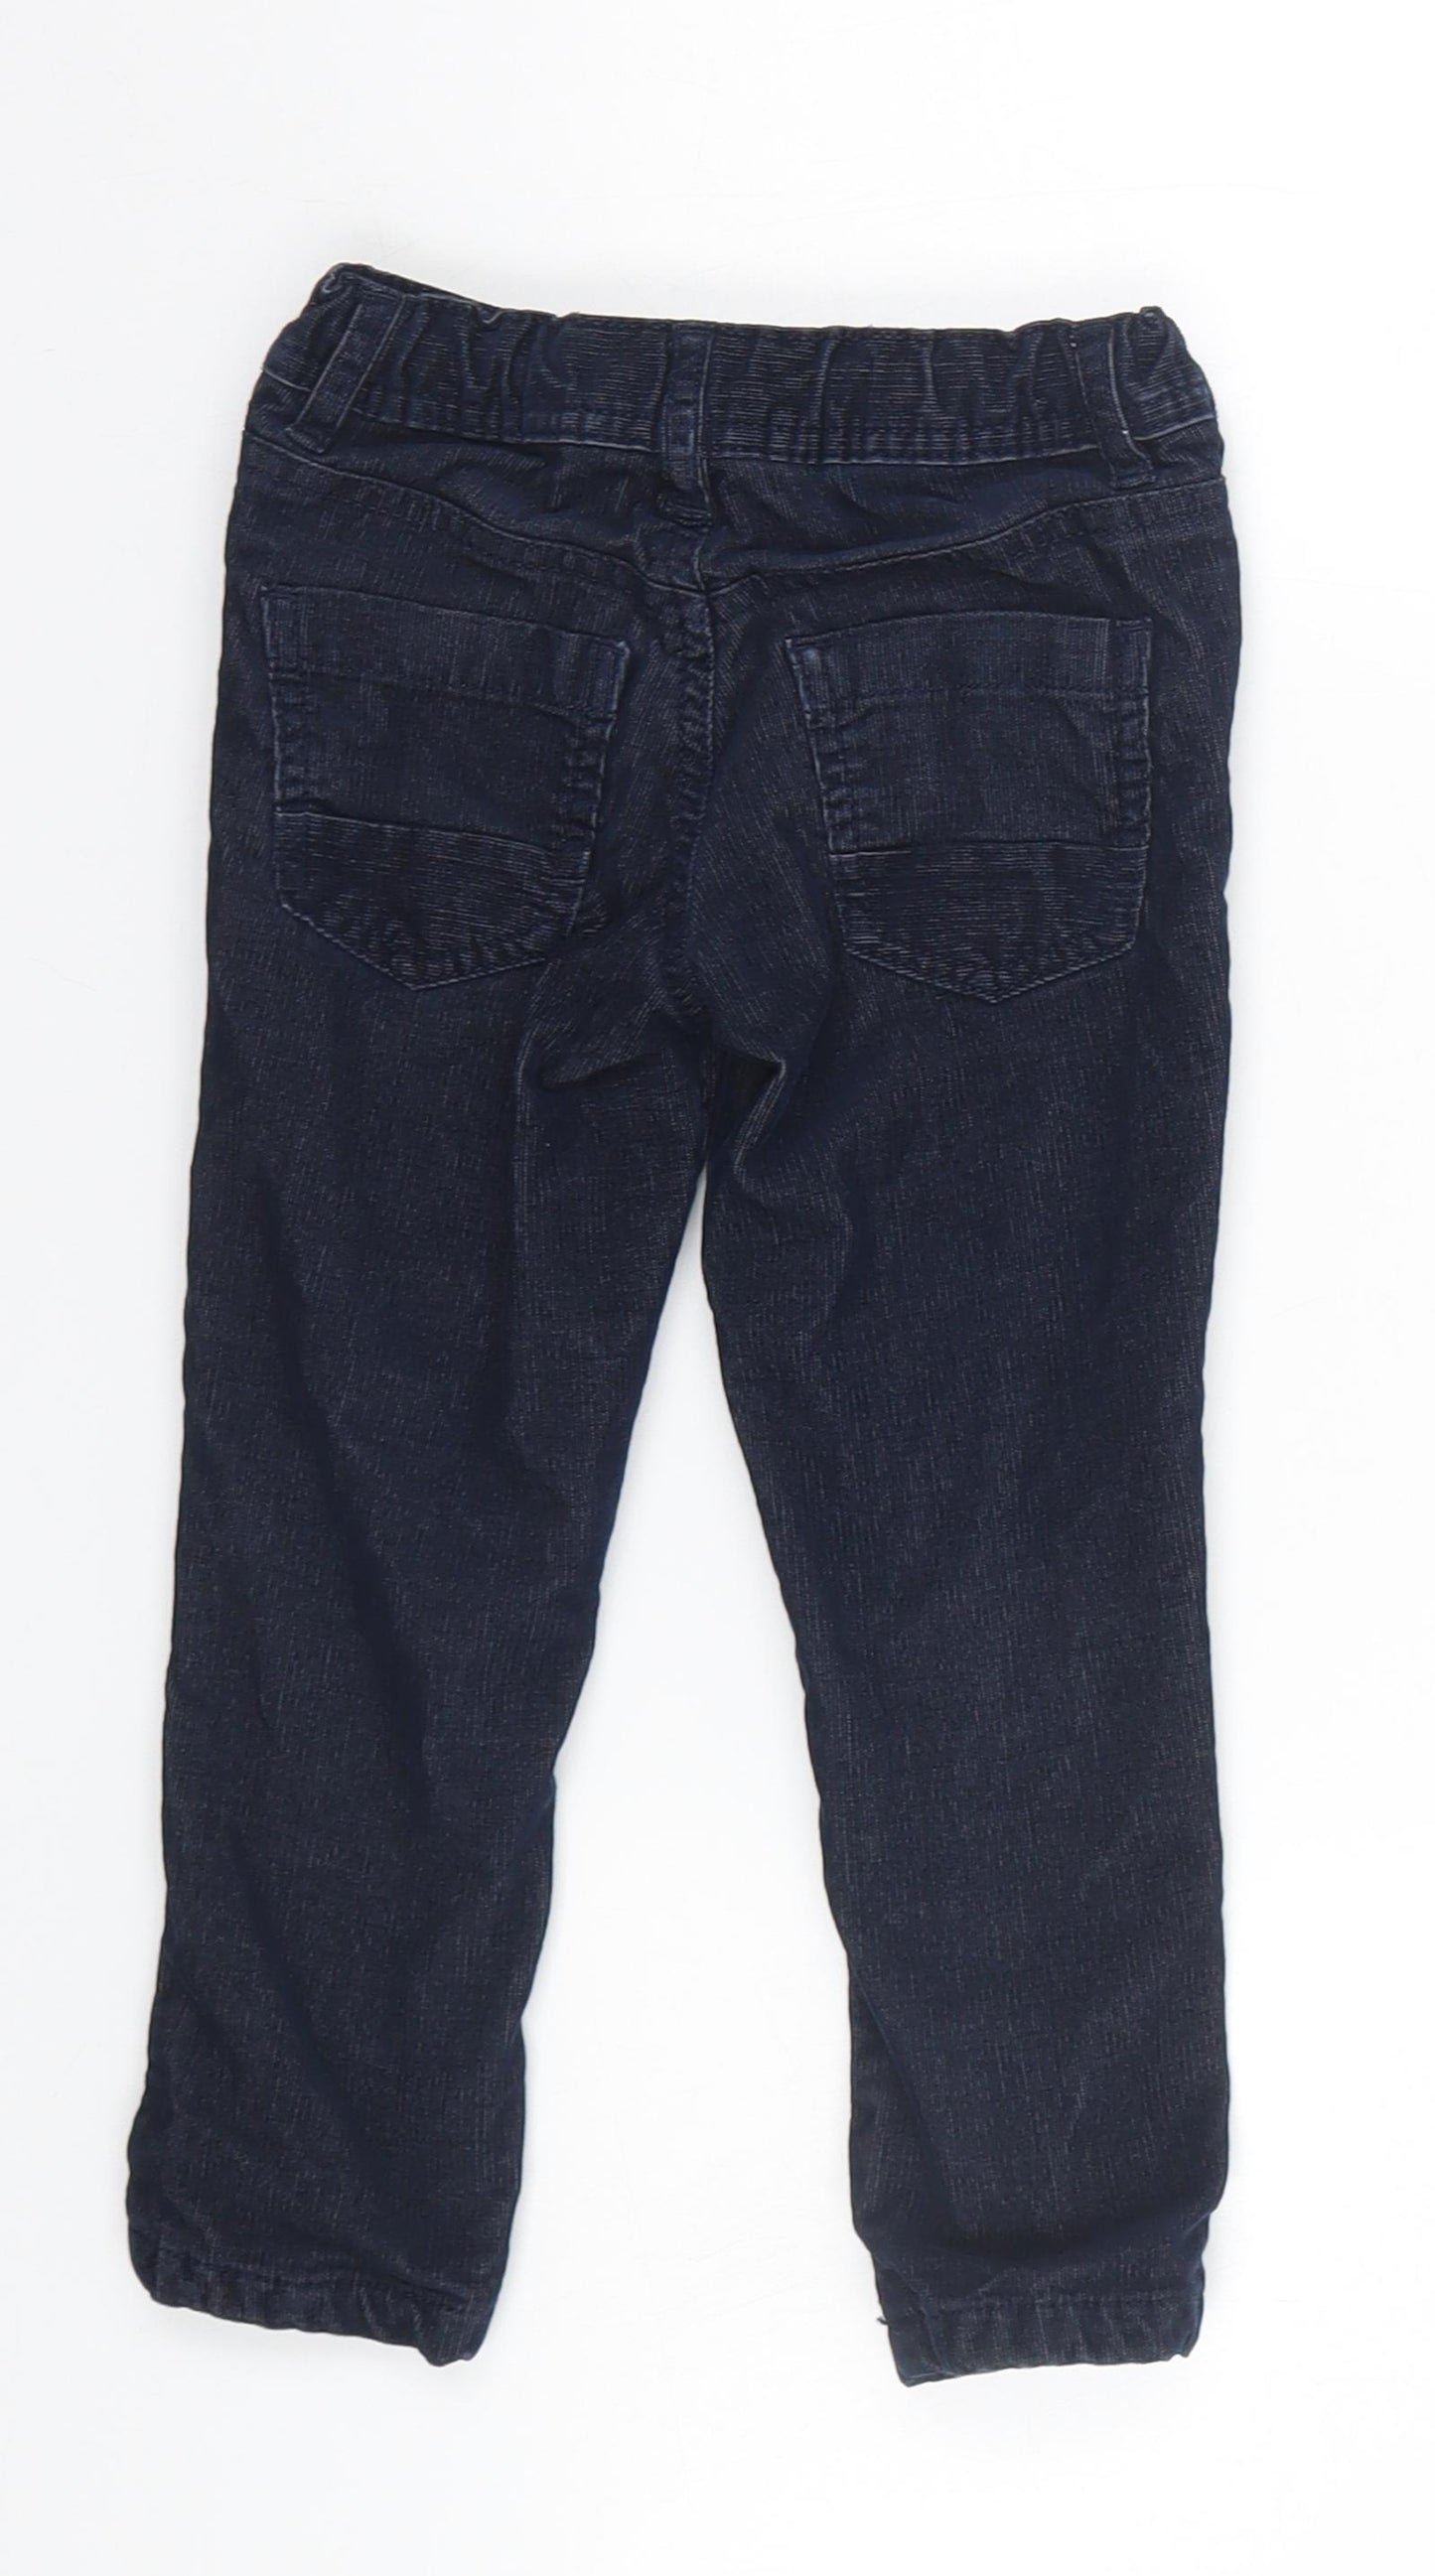 Marks and Spencer Boys Blue   Dungarees Trousers Size 2-3 Years